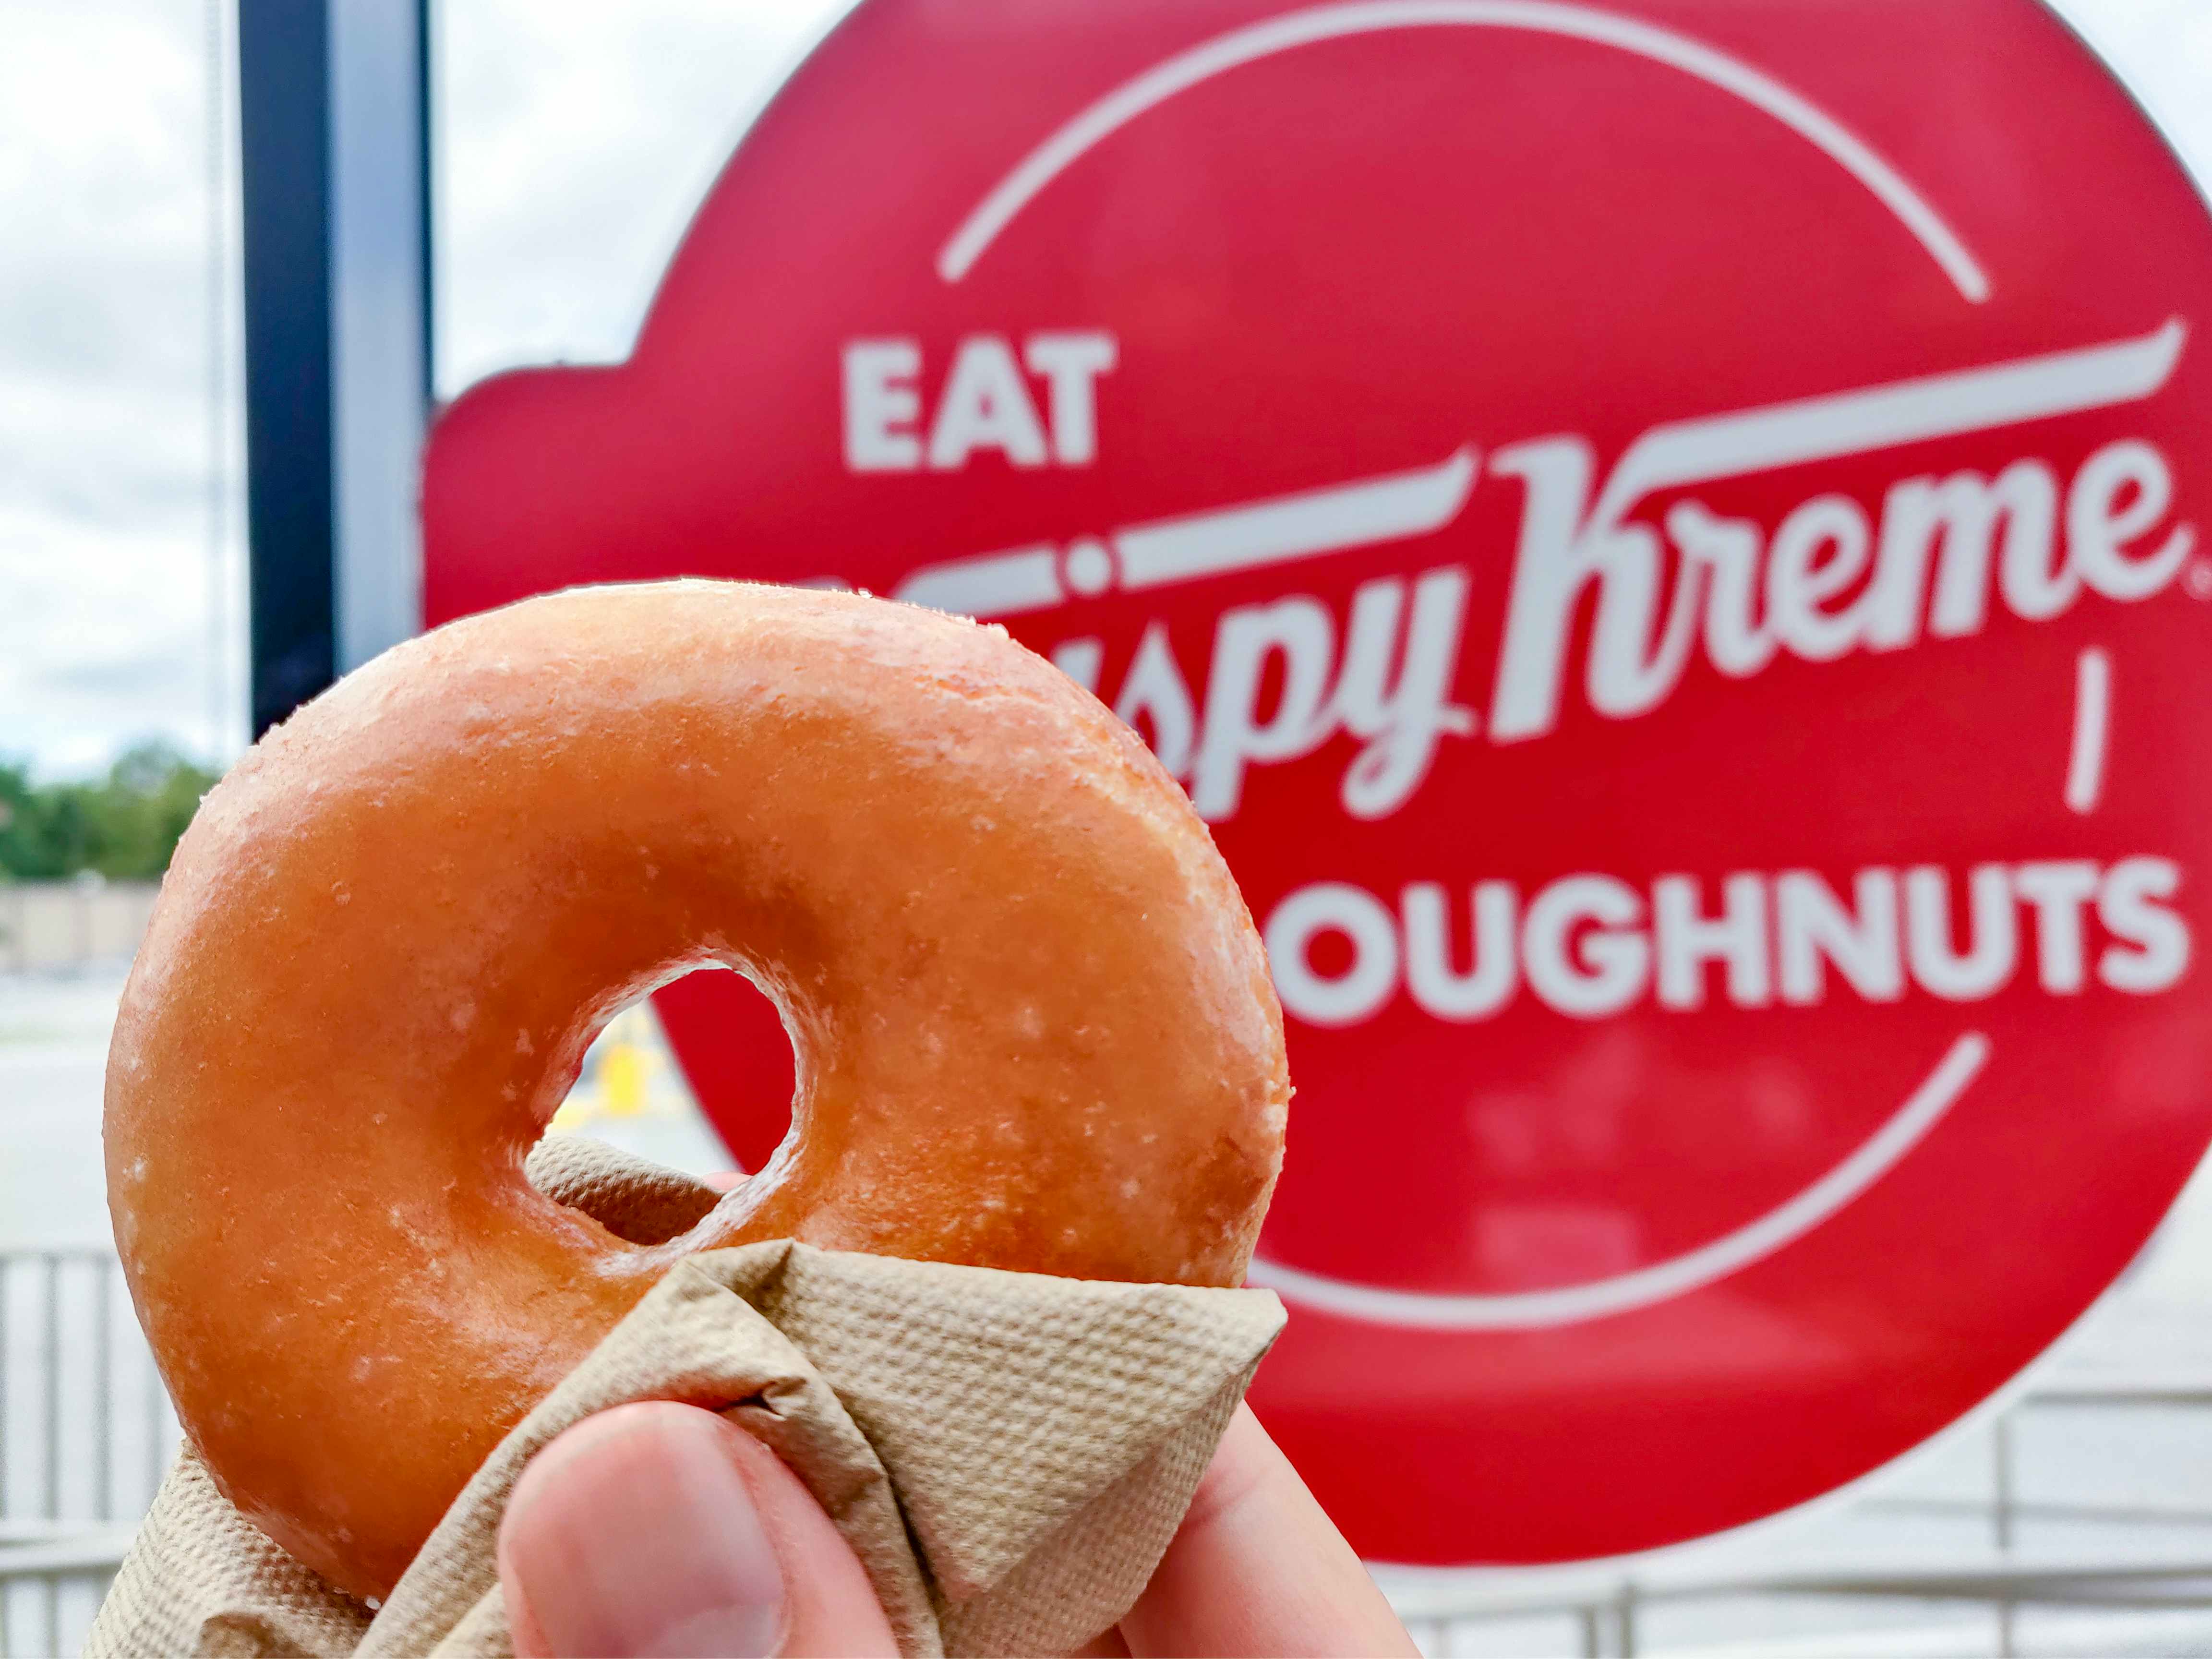 A person's hand holding up a Krispy Kreme donut in front of a Krispy Kreme sign.